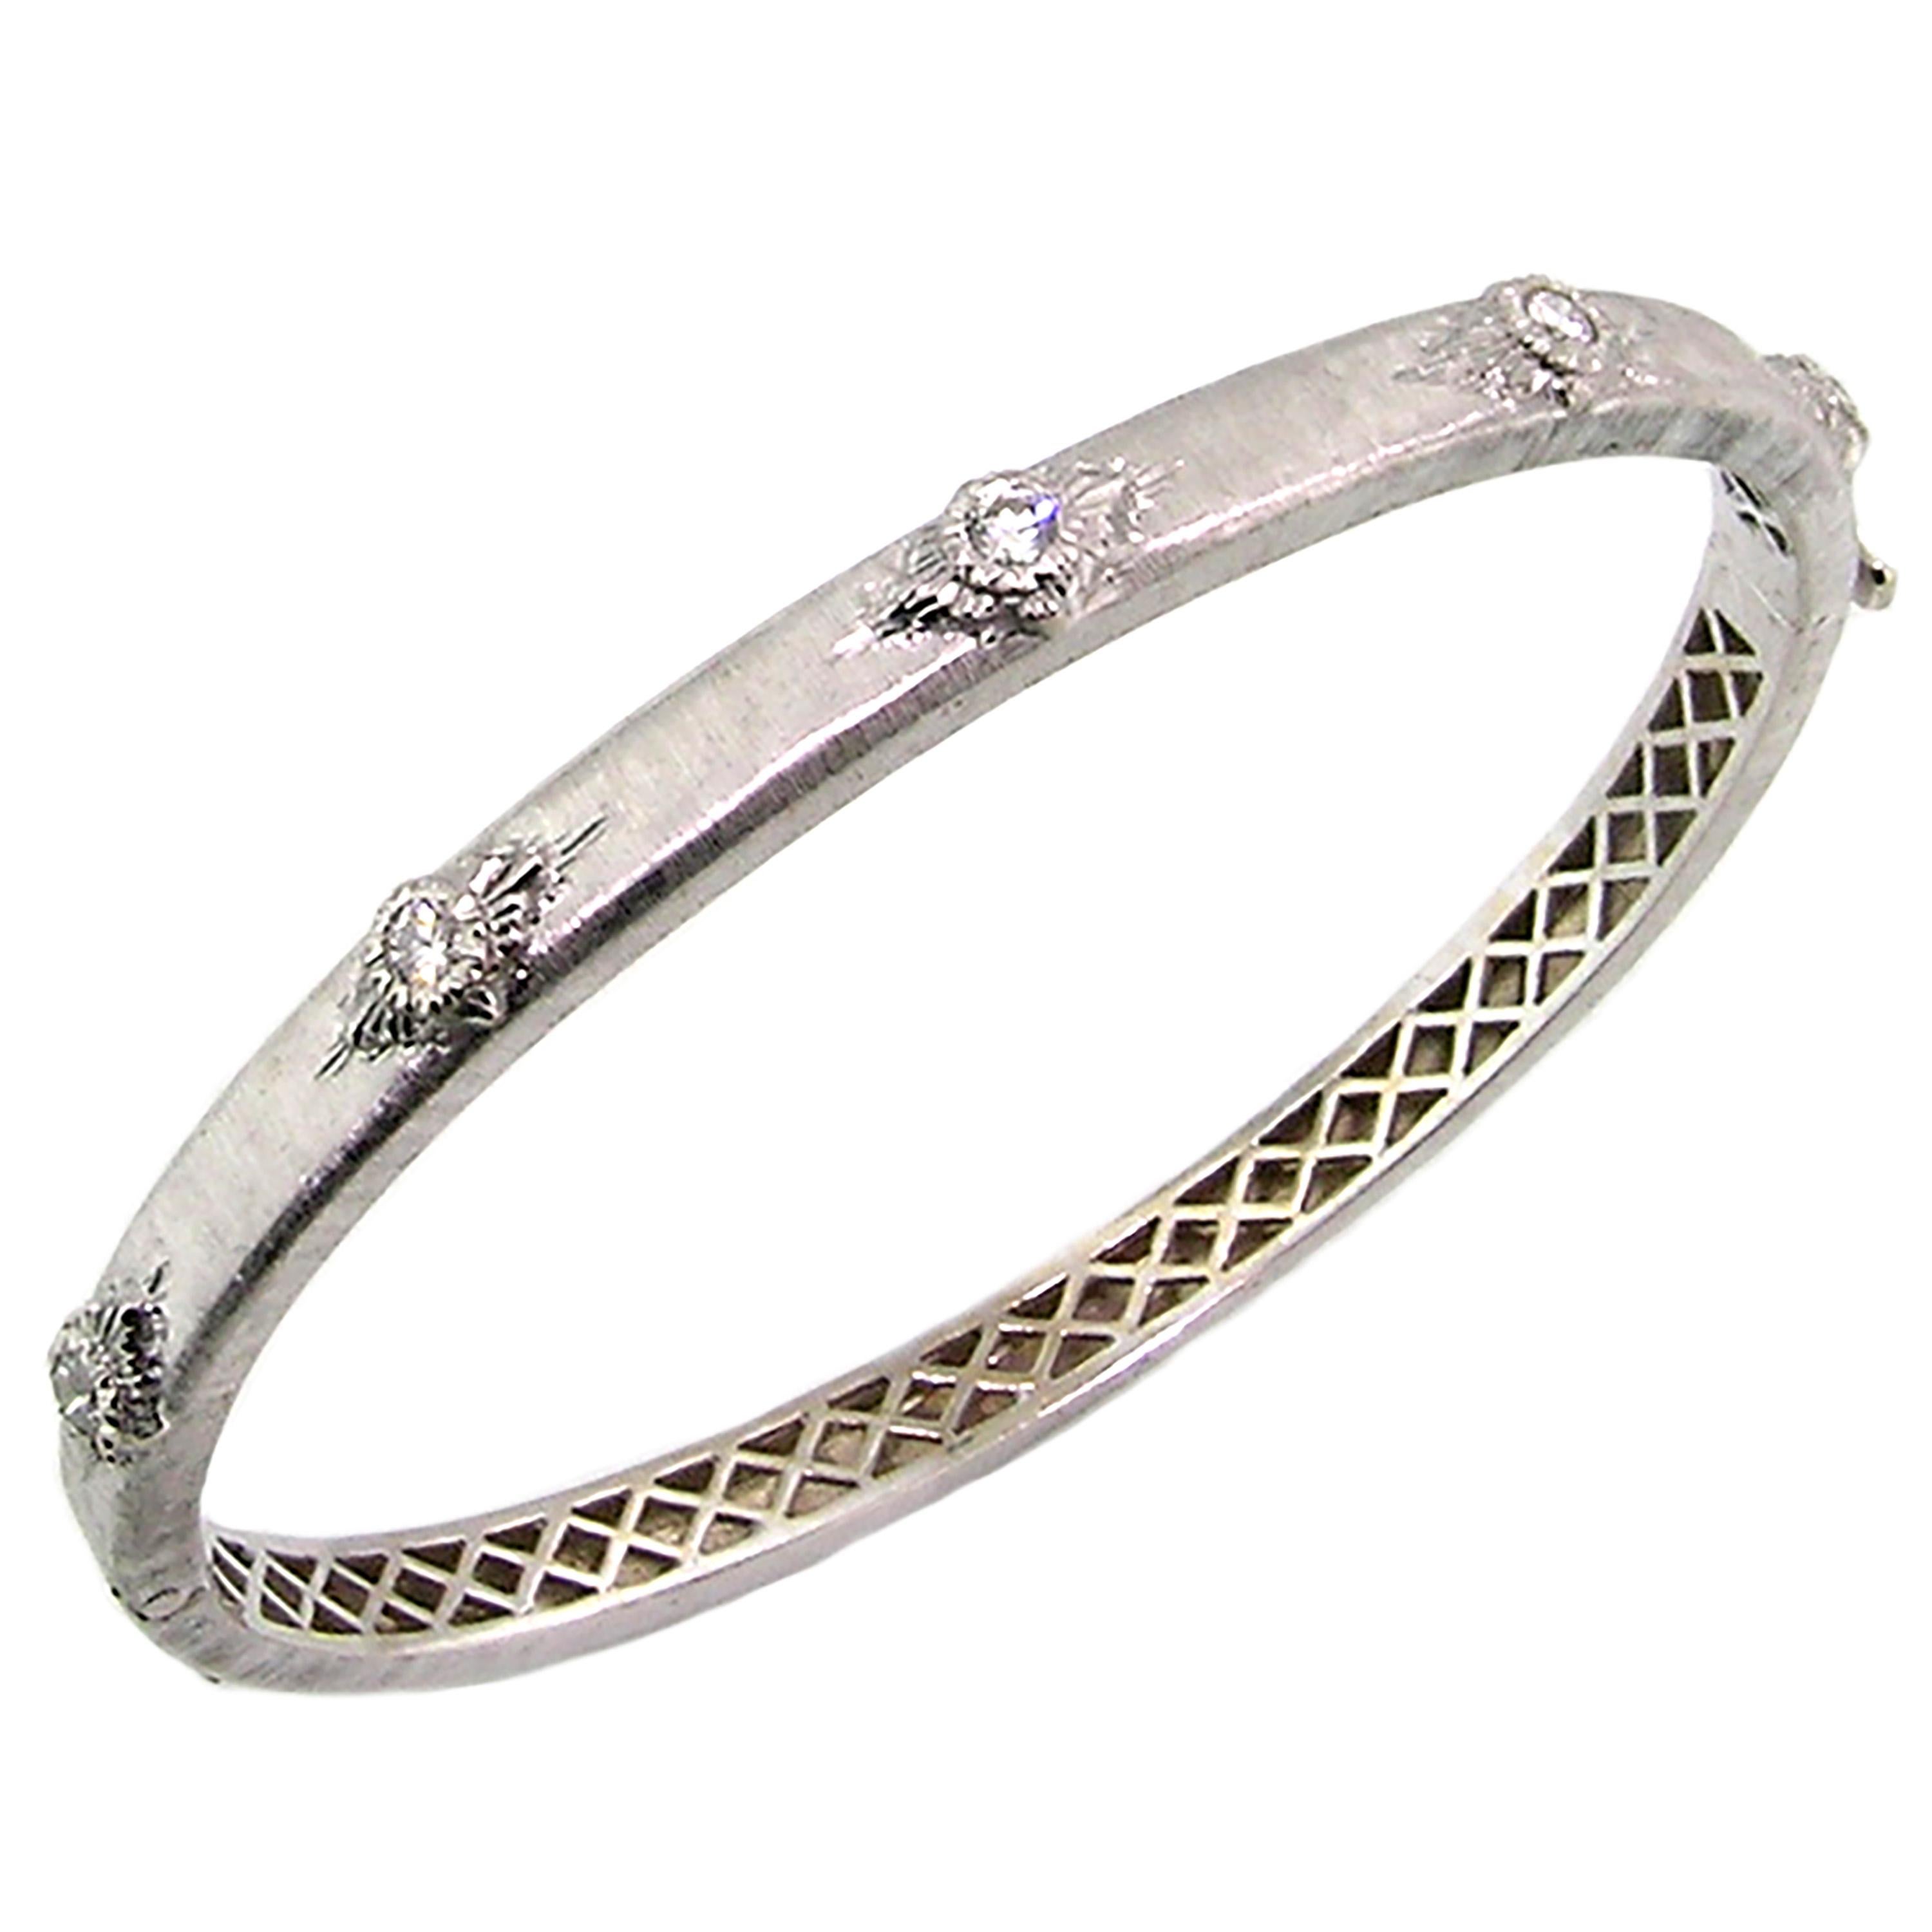 18 Karat Diamond Bangle in White, Handmade and Hand Engraved in Florence, Italy